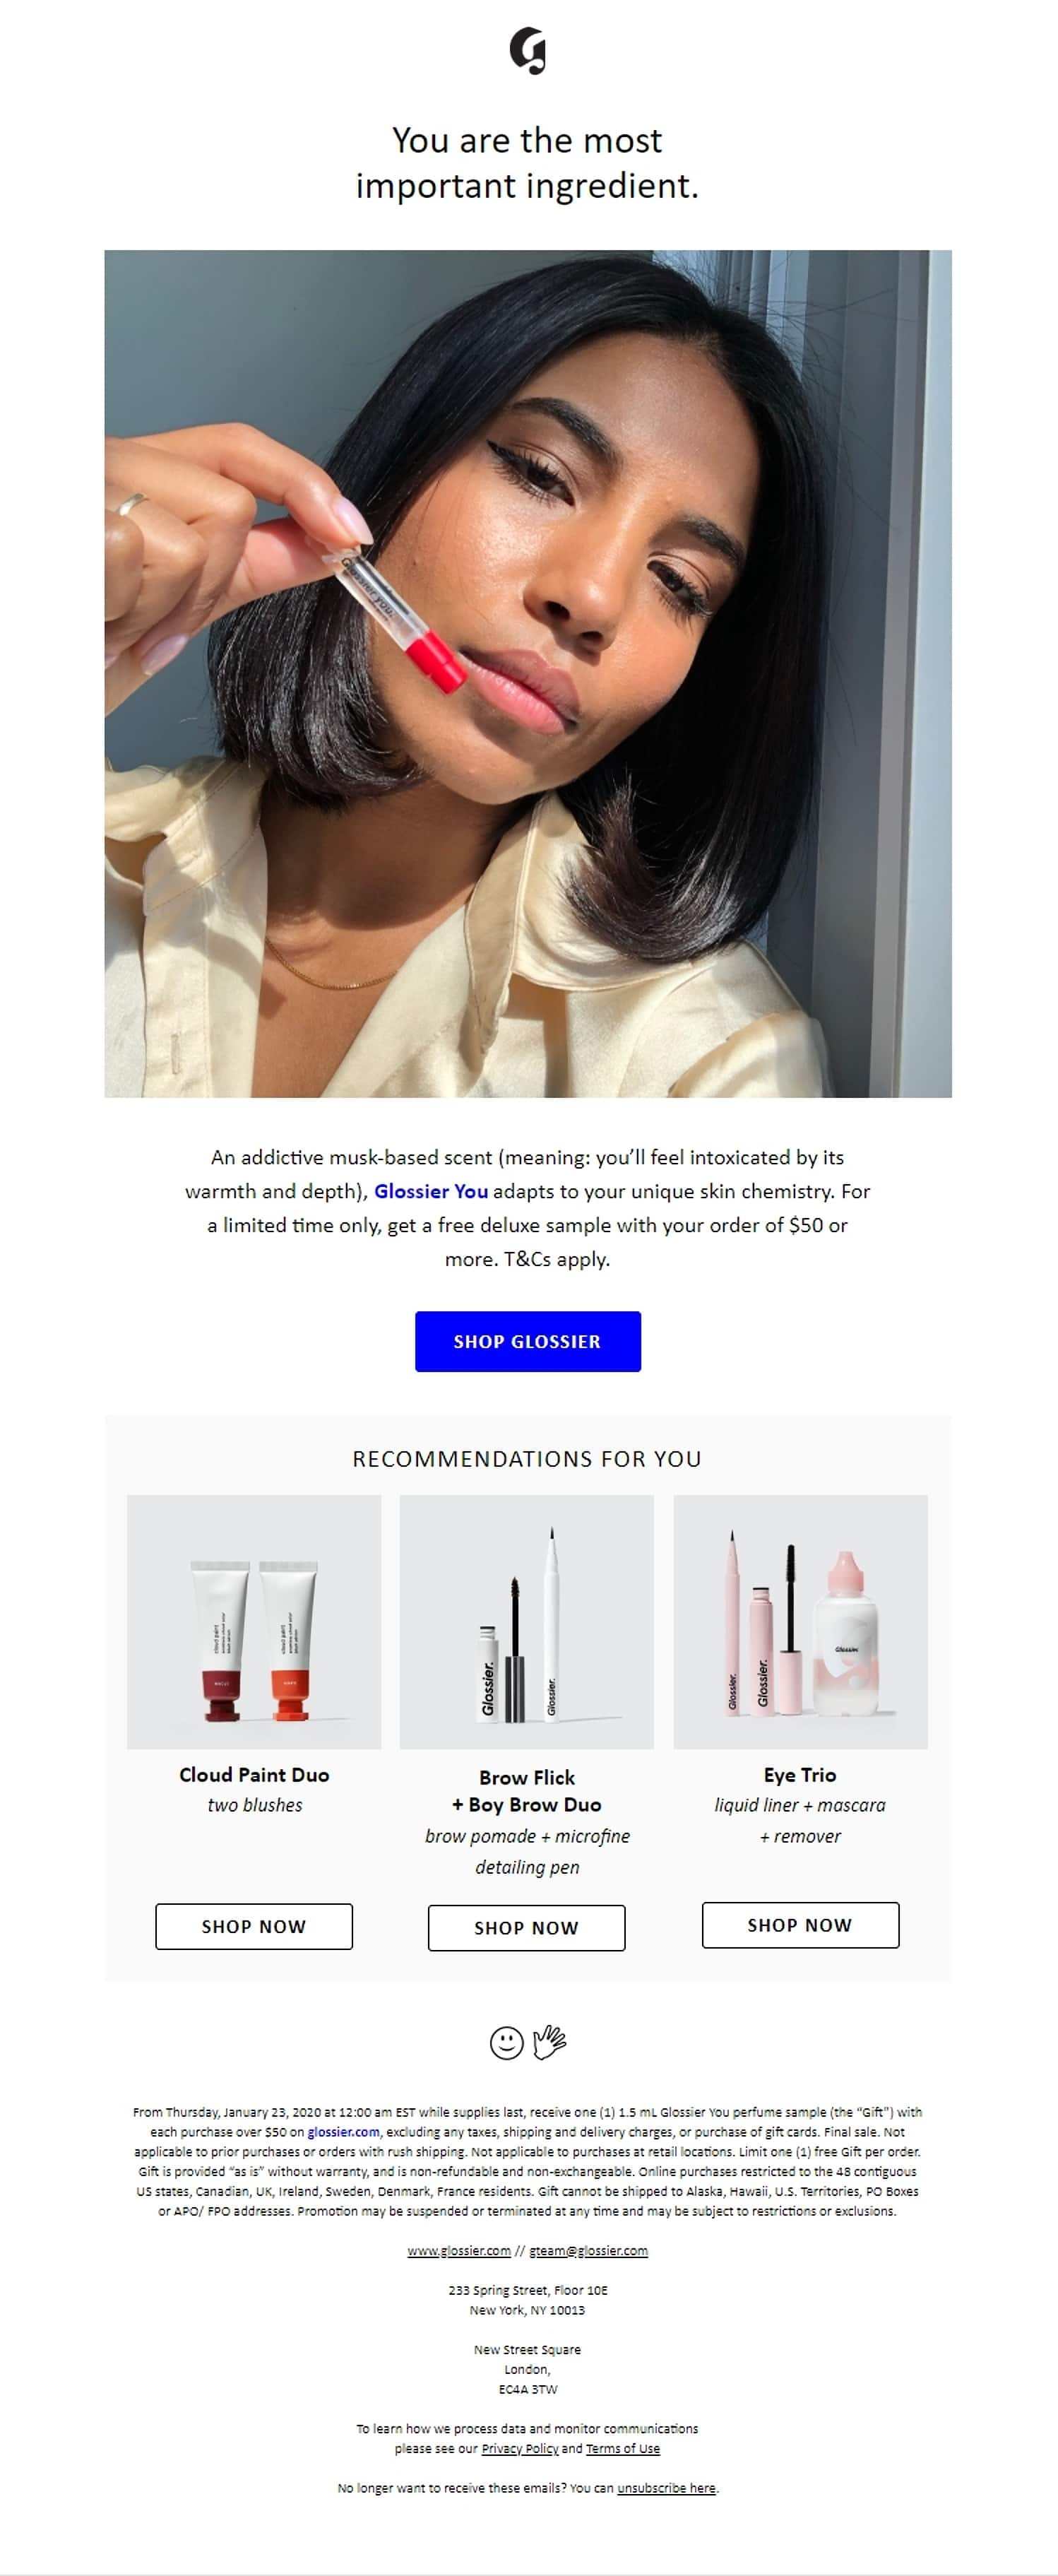 Subliminal advertising in email marketing - Glossier's image and headline